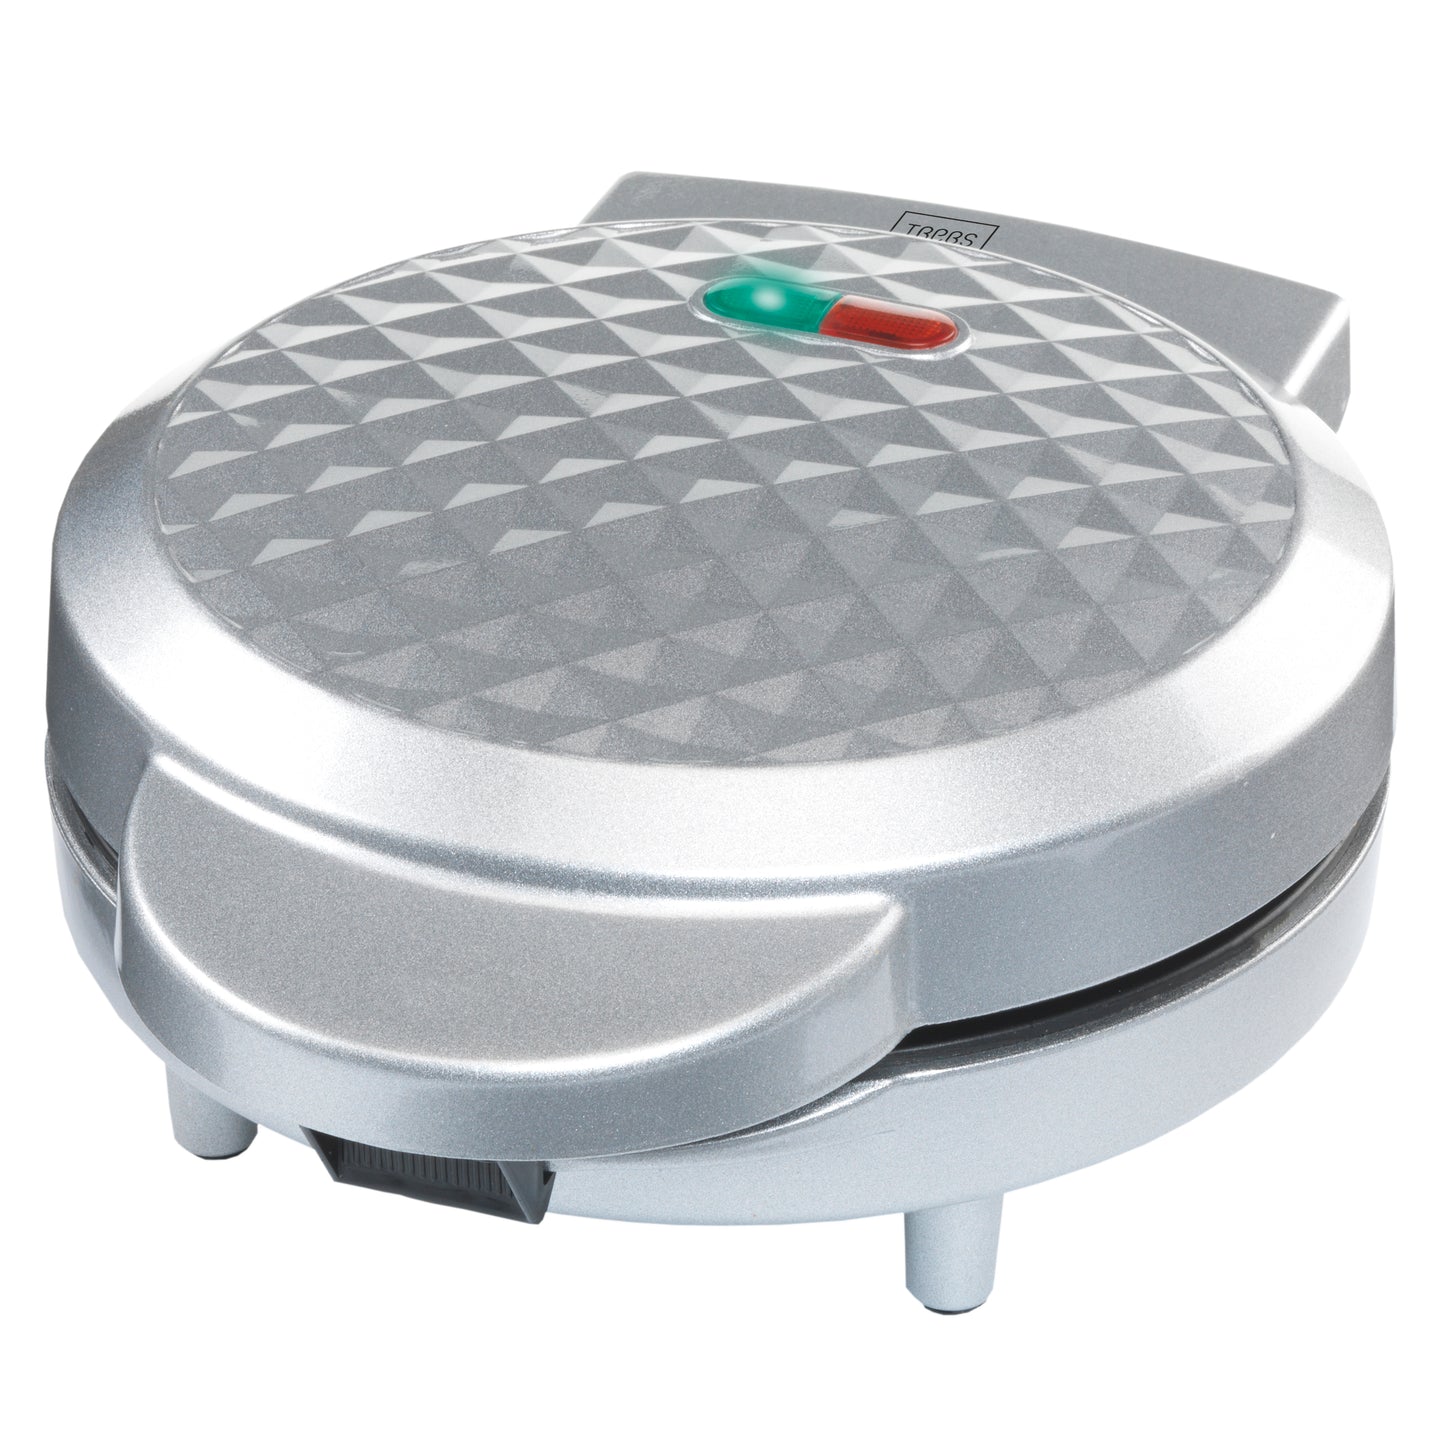 Trebs 99361 - Bubble waffle maker Comfortbakery with indicator light and non-stick coating